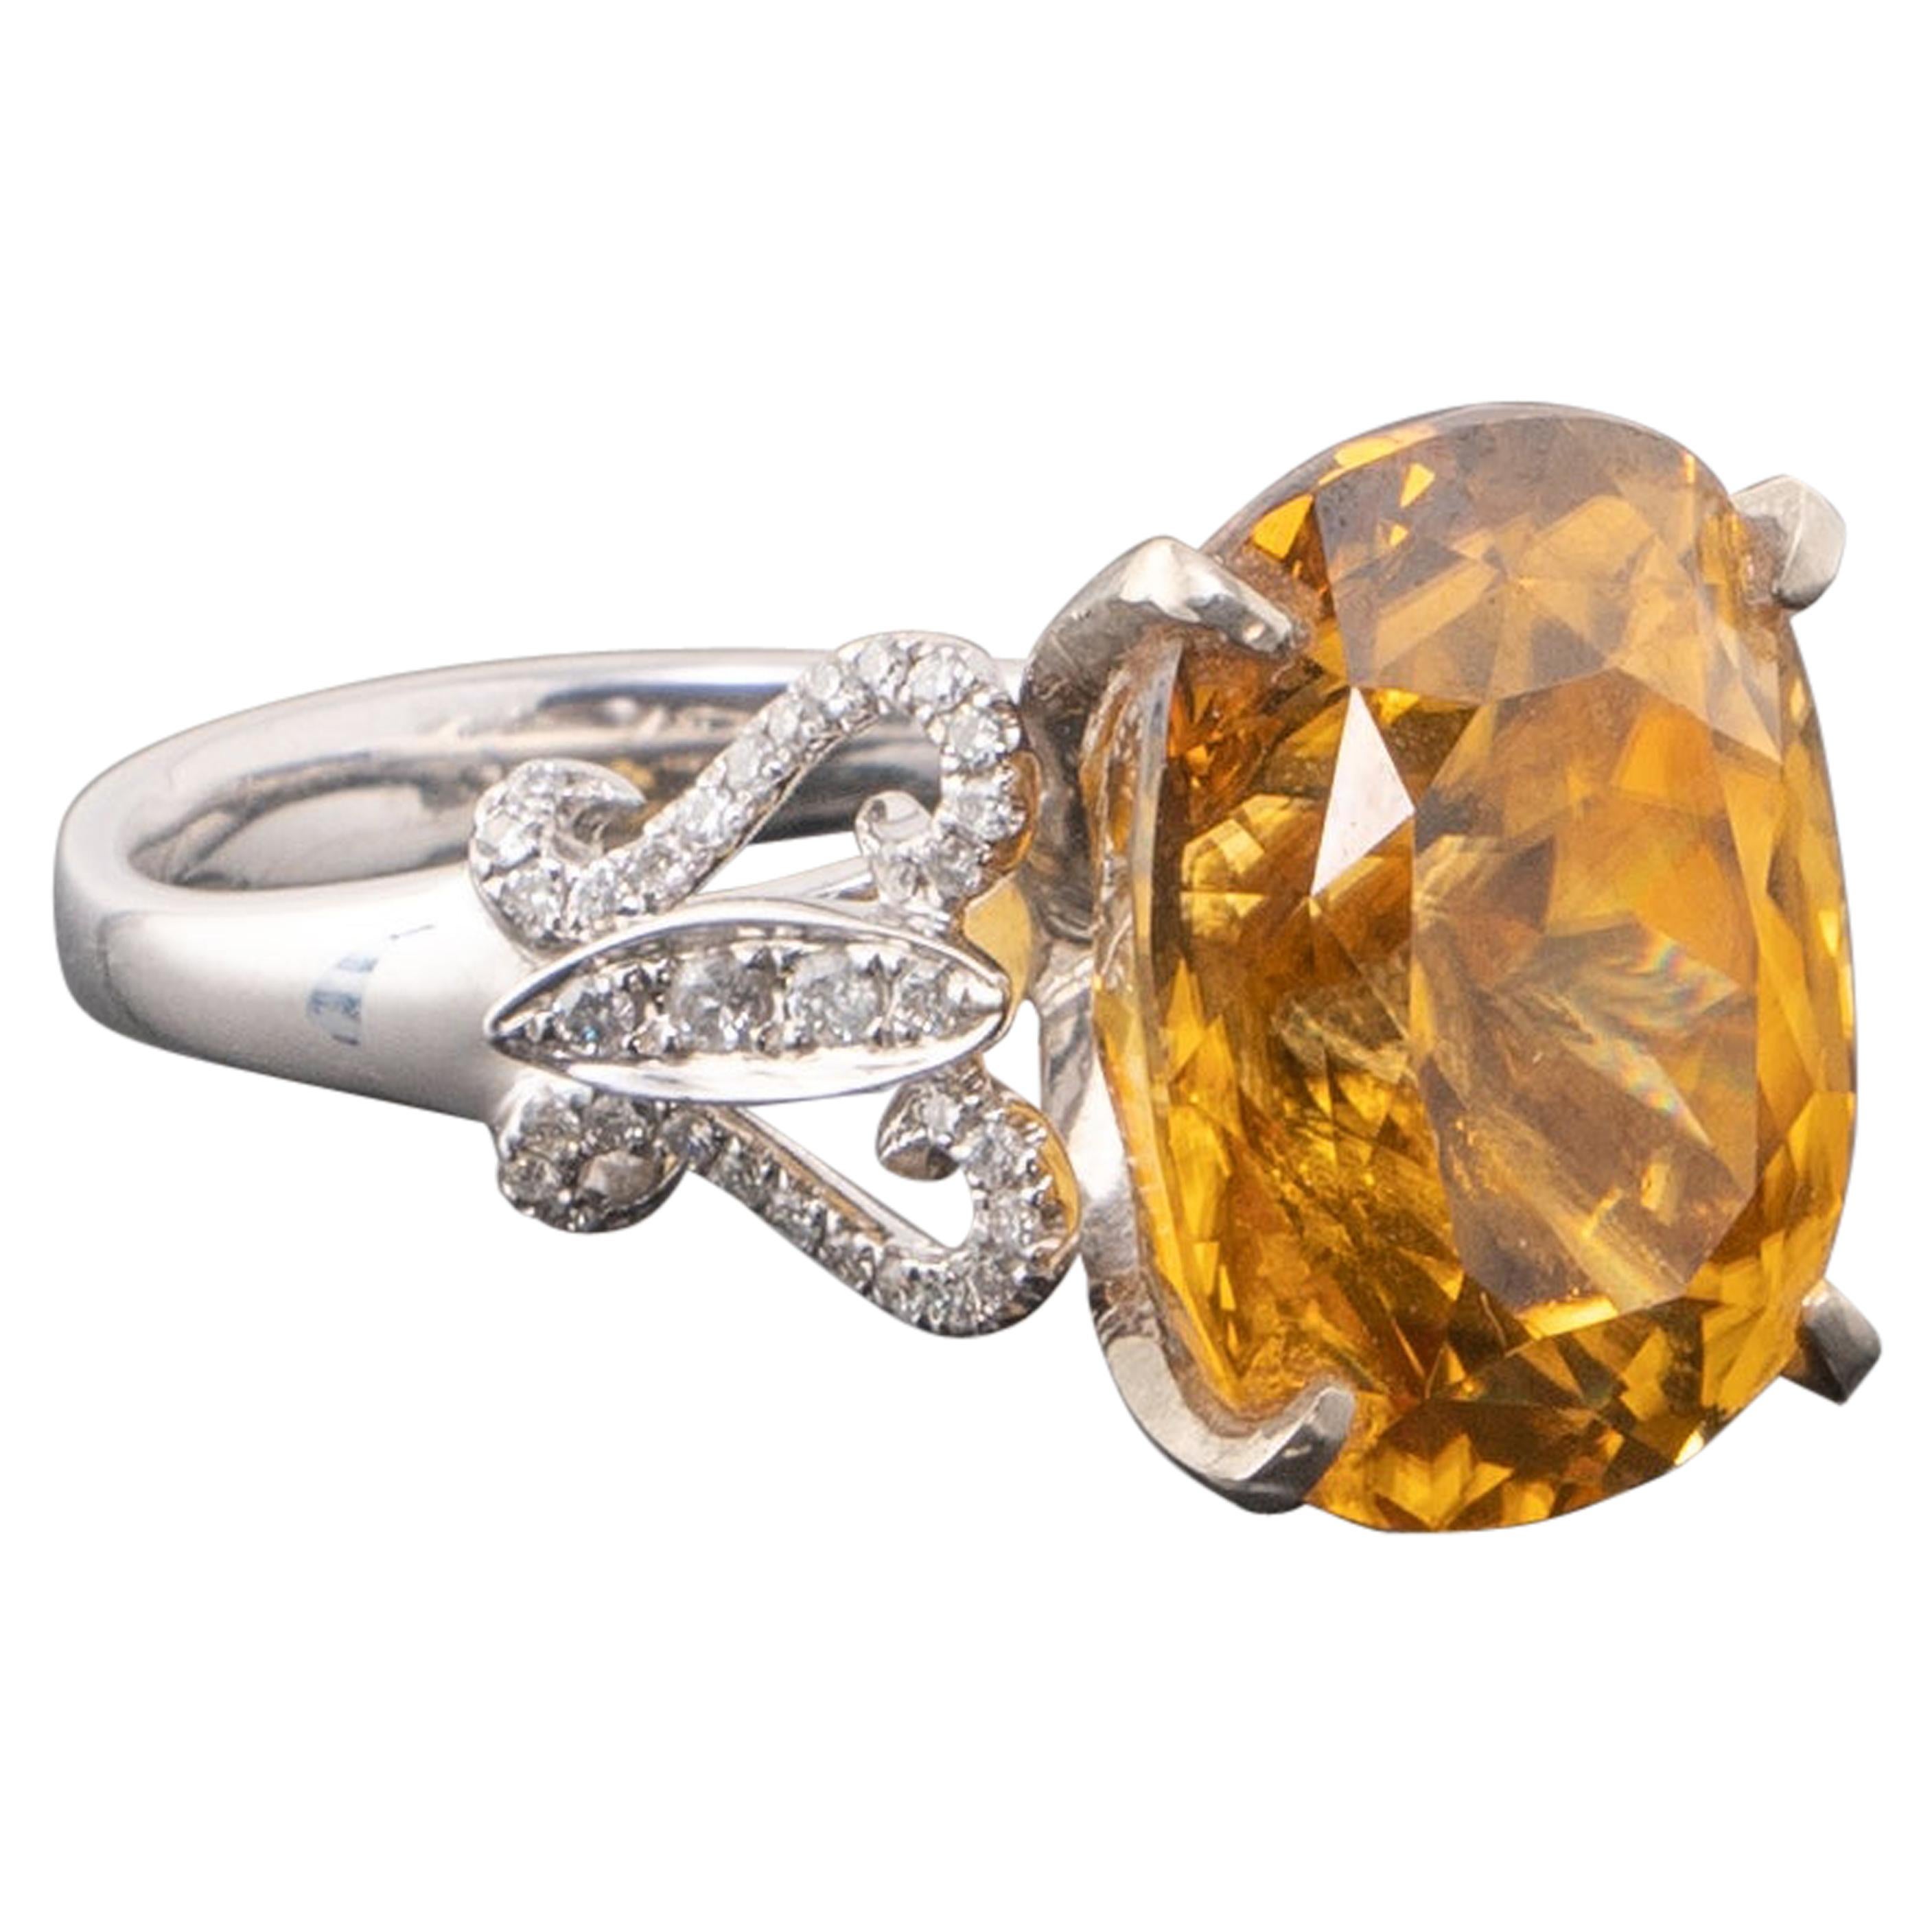 Certified 20.38 Carat Natural Yellow Zircon and Diamond Cocktail Ring For Sale